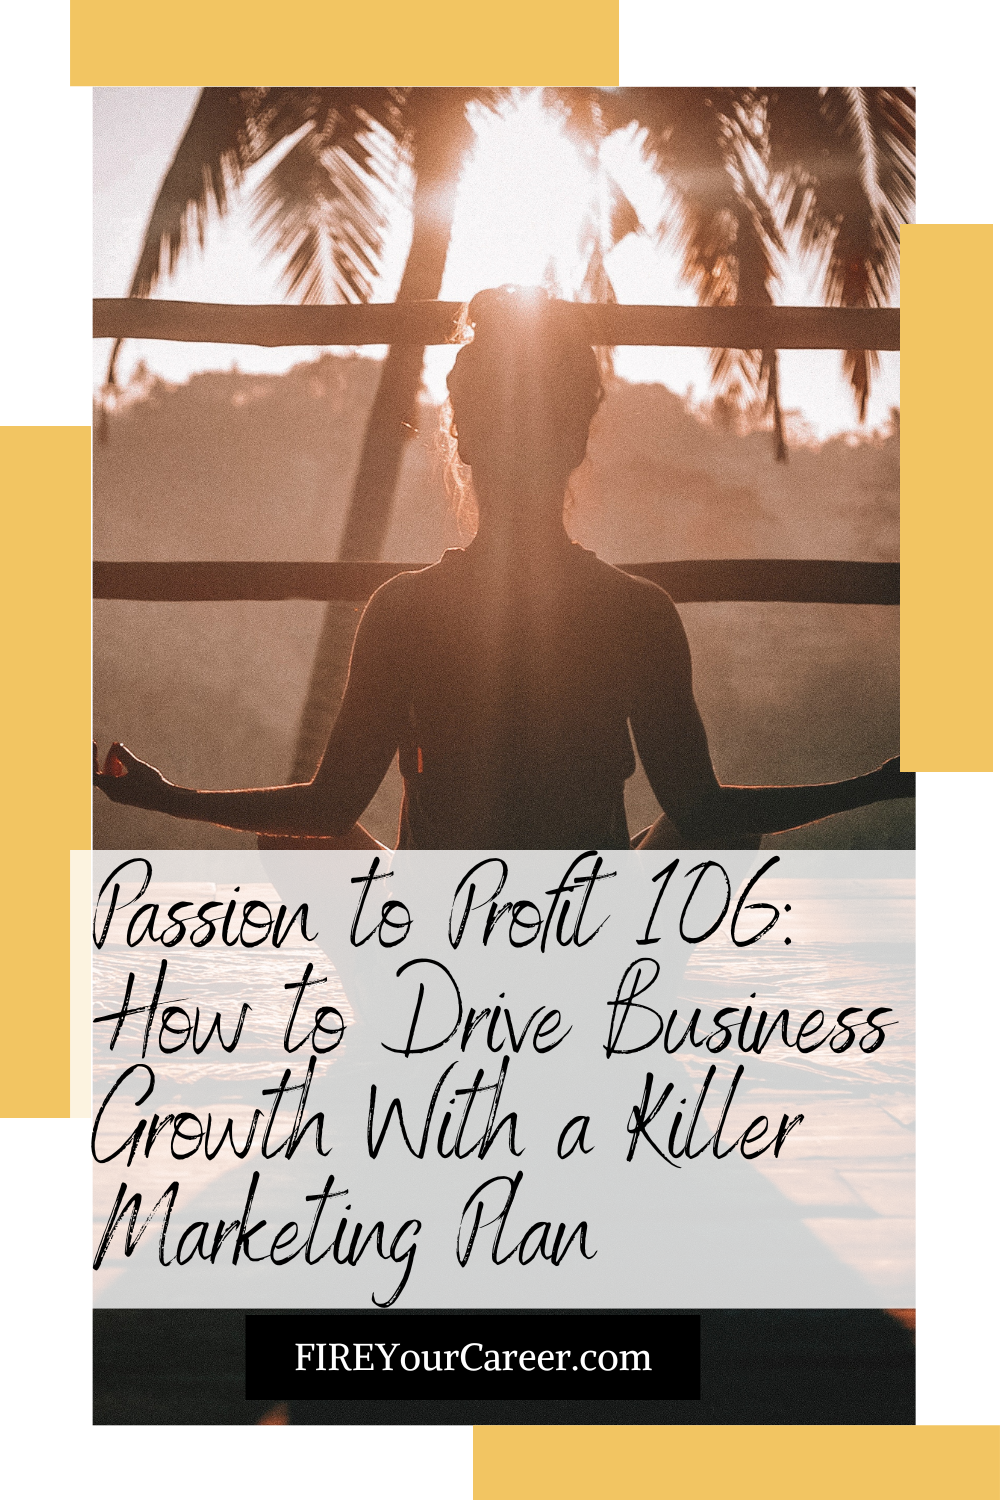 Passion to Profit 106 How to Drive Business Growth With a Killer Marketing Plan Pinterest